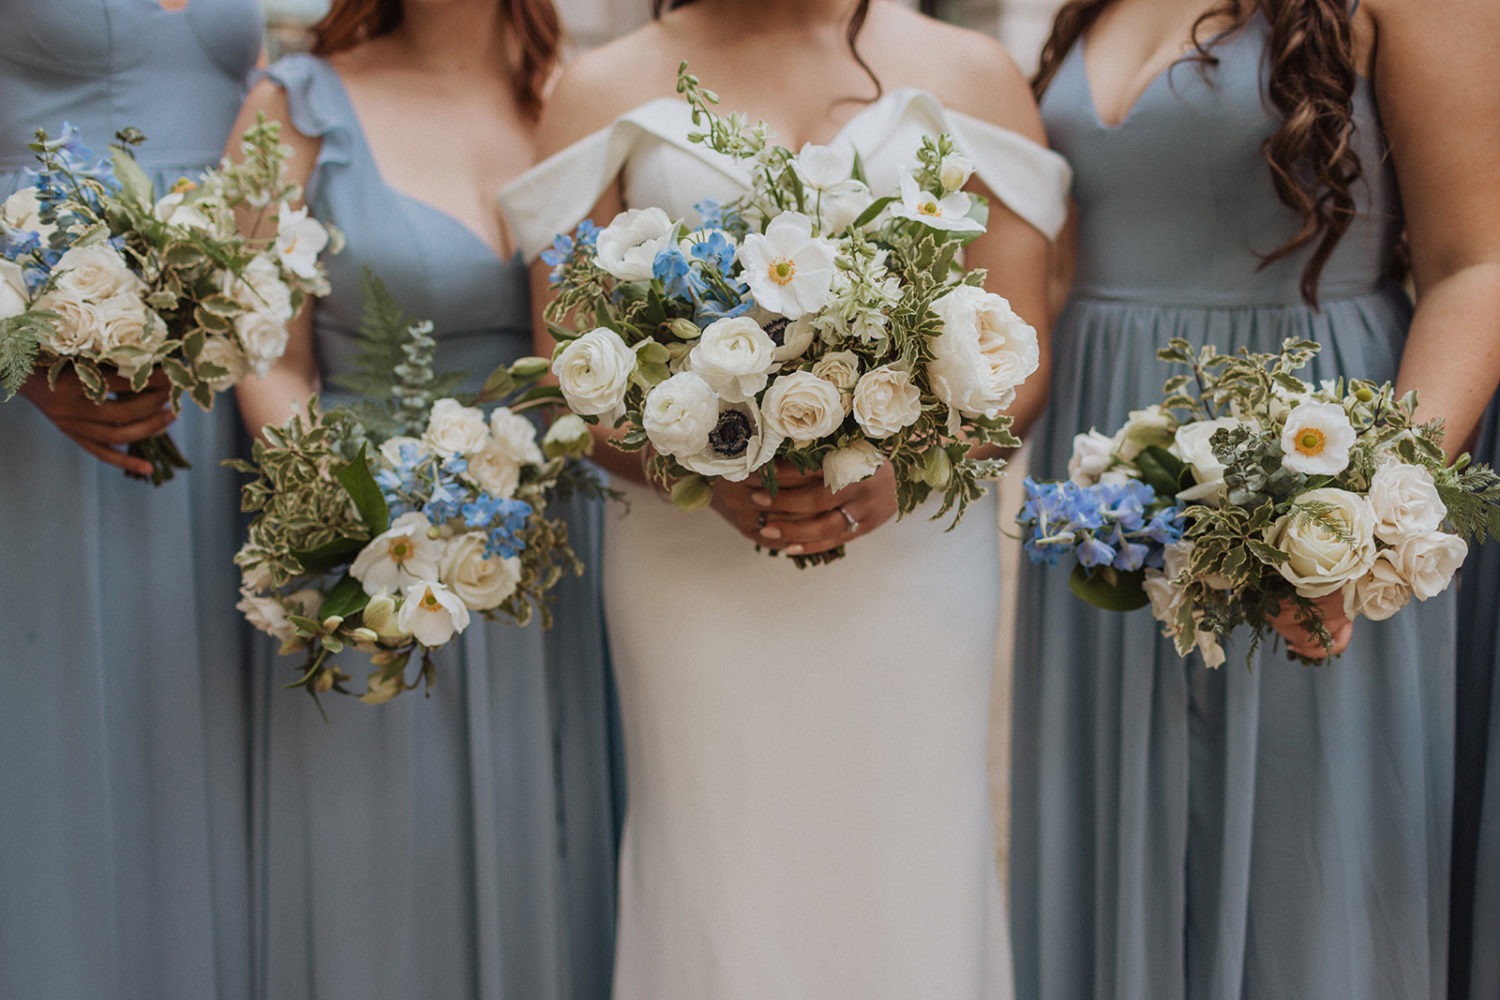 bride and bridesmaids hold white and blue wedding bouquets at DC mansion wedding venue